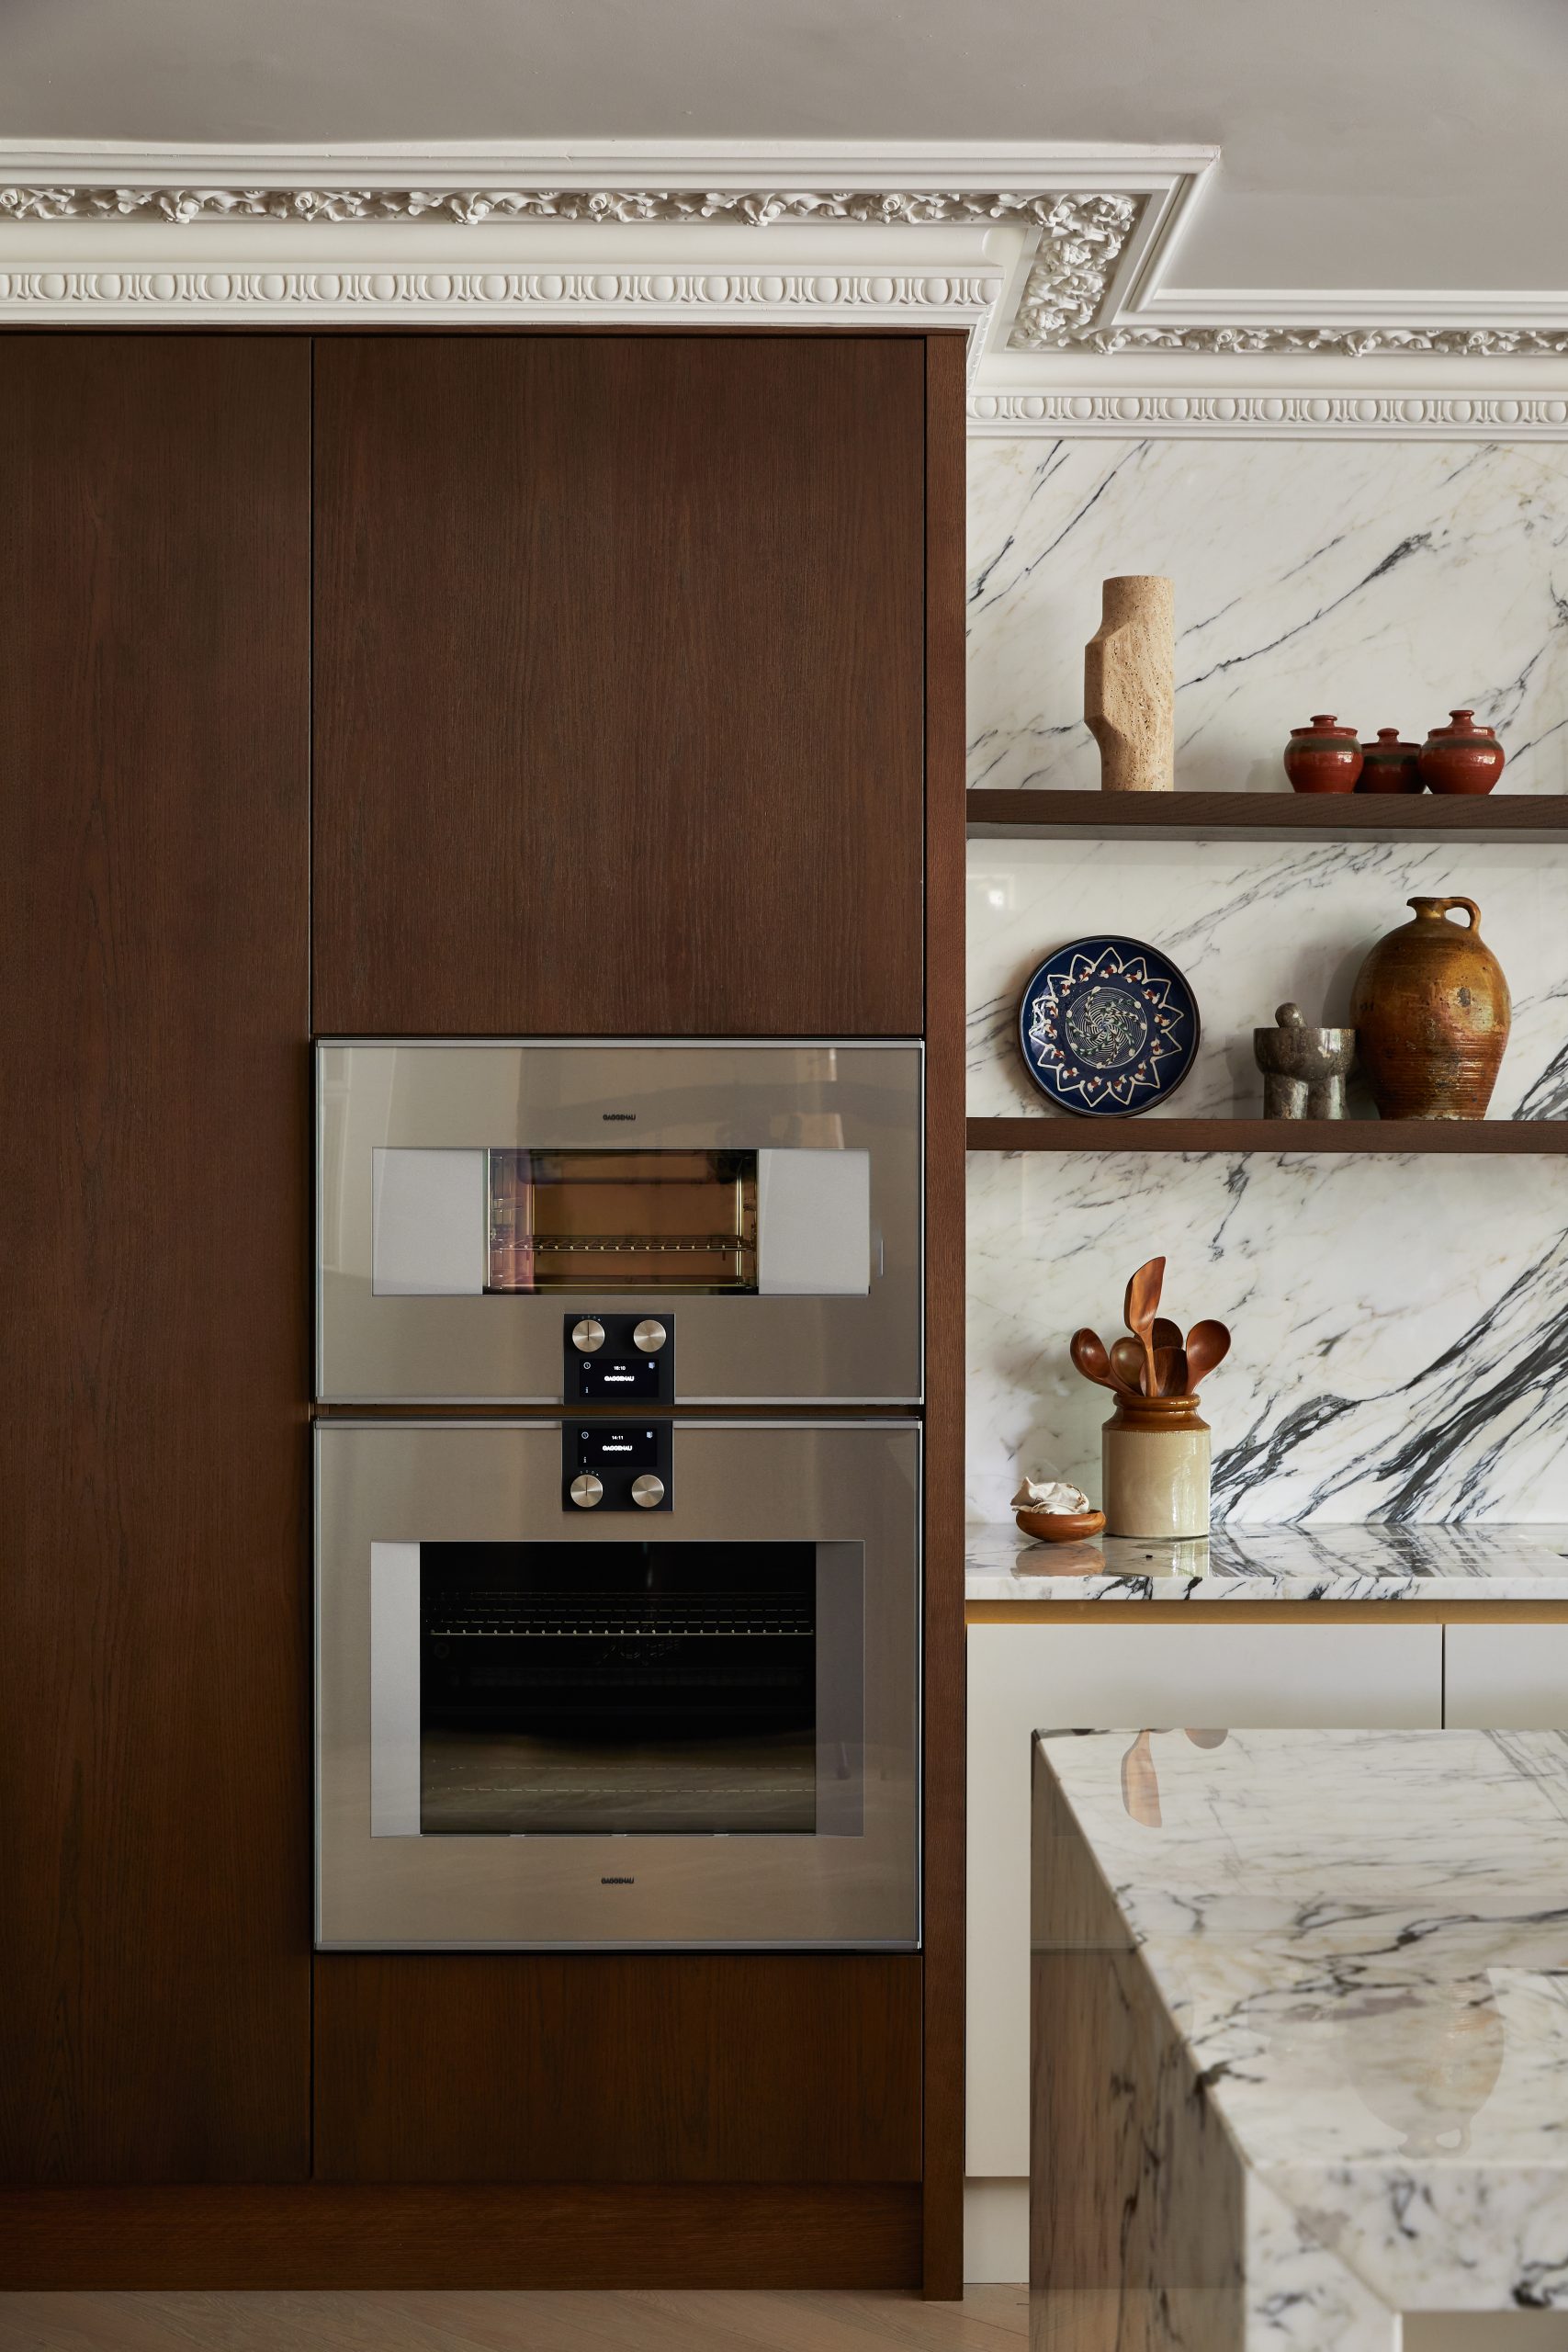 A Gaggenau oven sits flush with the kitchen surface, making a bold statement
